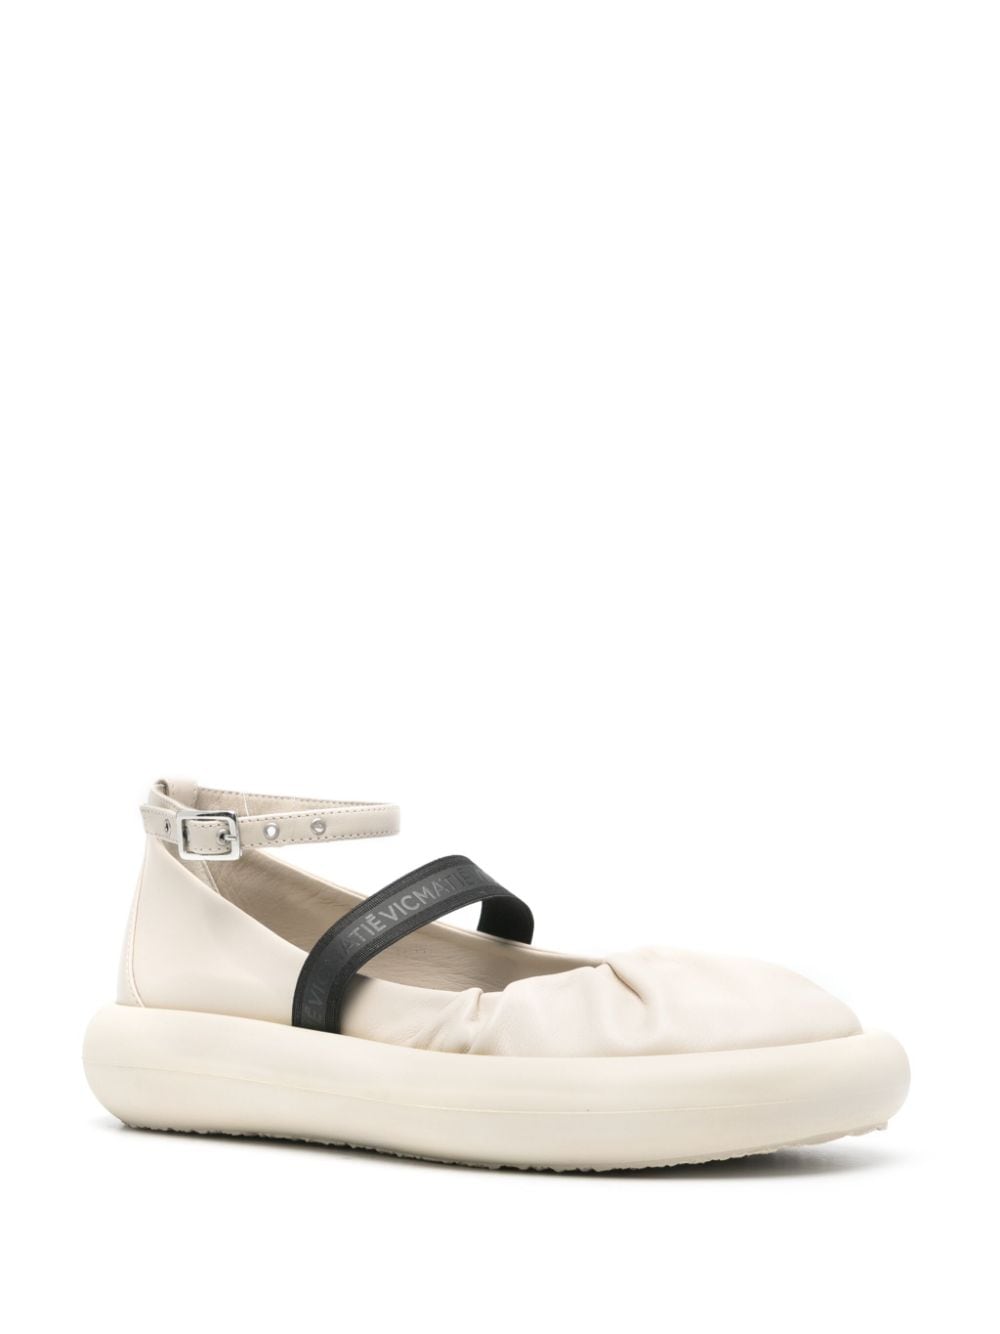 Vic Matie nappa-leather ballerina shoes - Beige